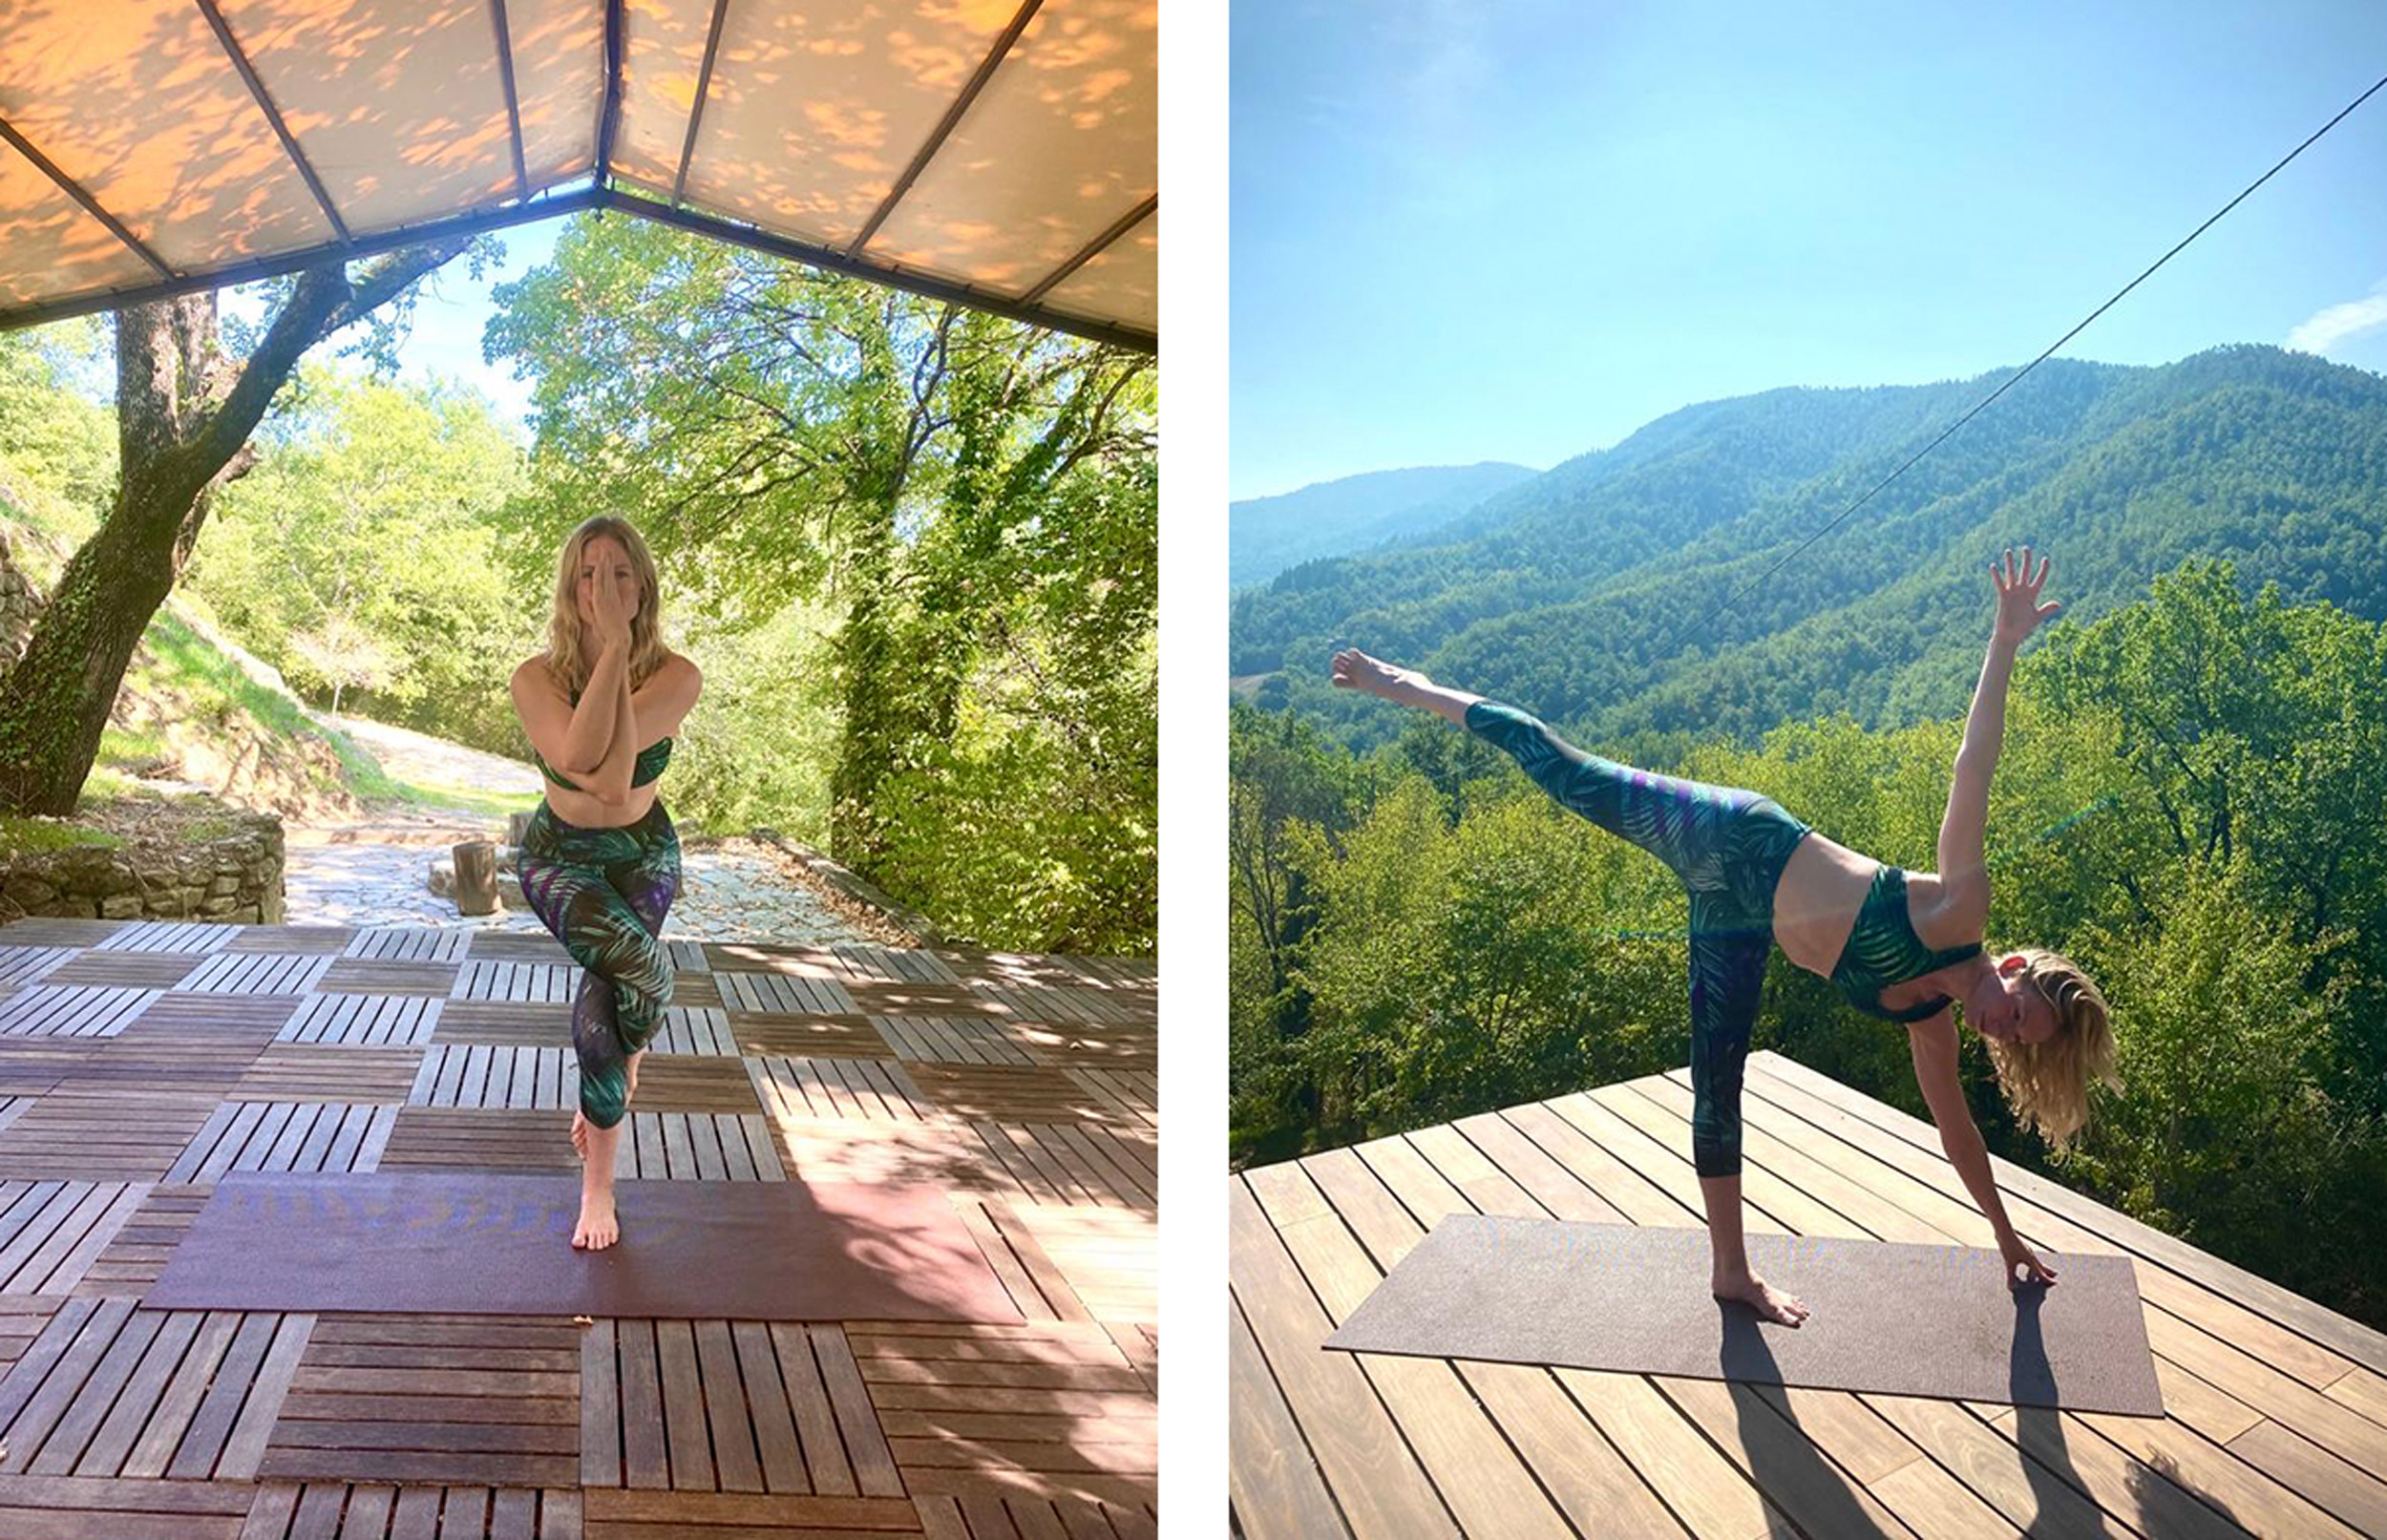 glorious tuuli shipster doing yoga in the mountains